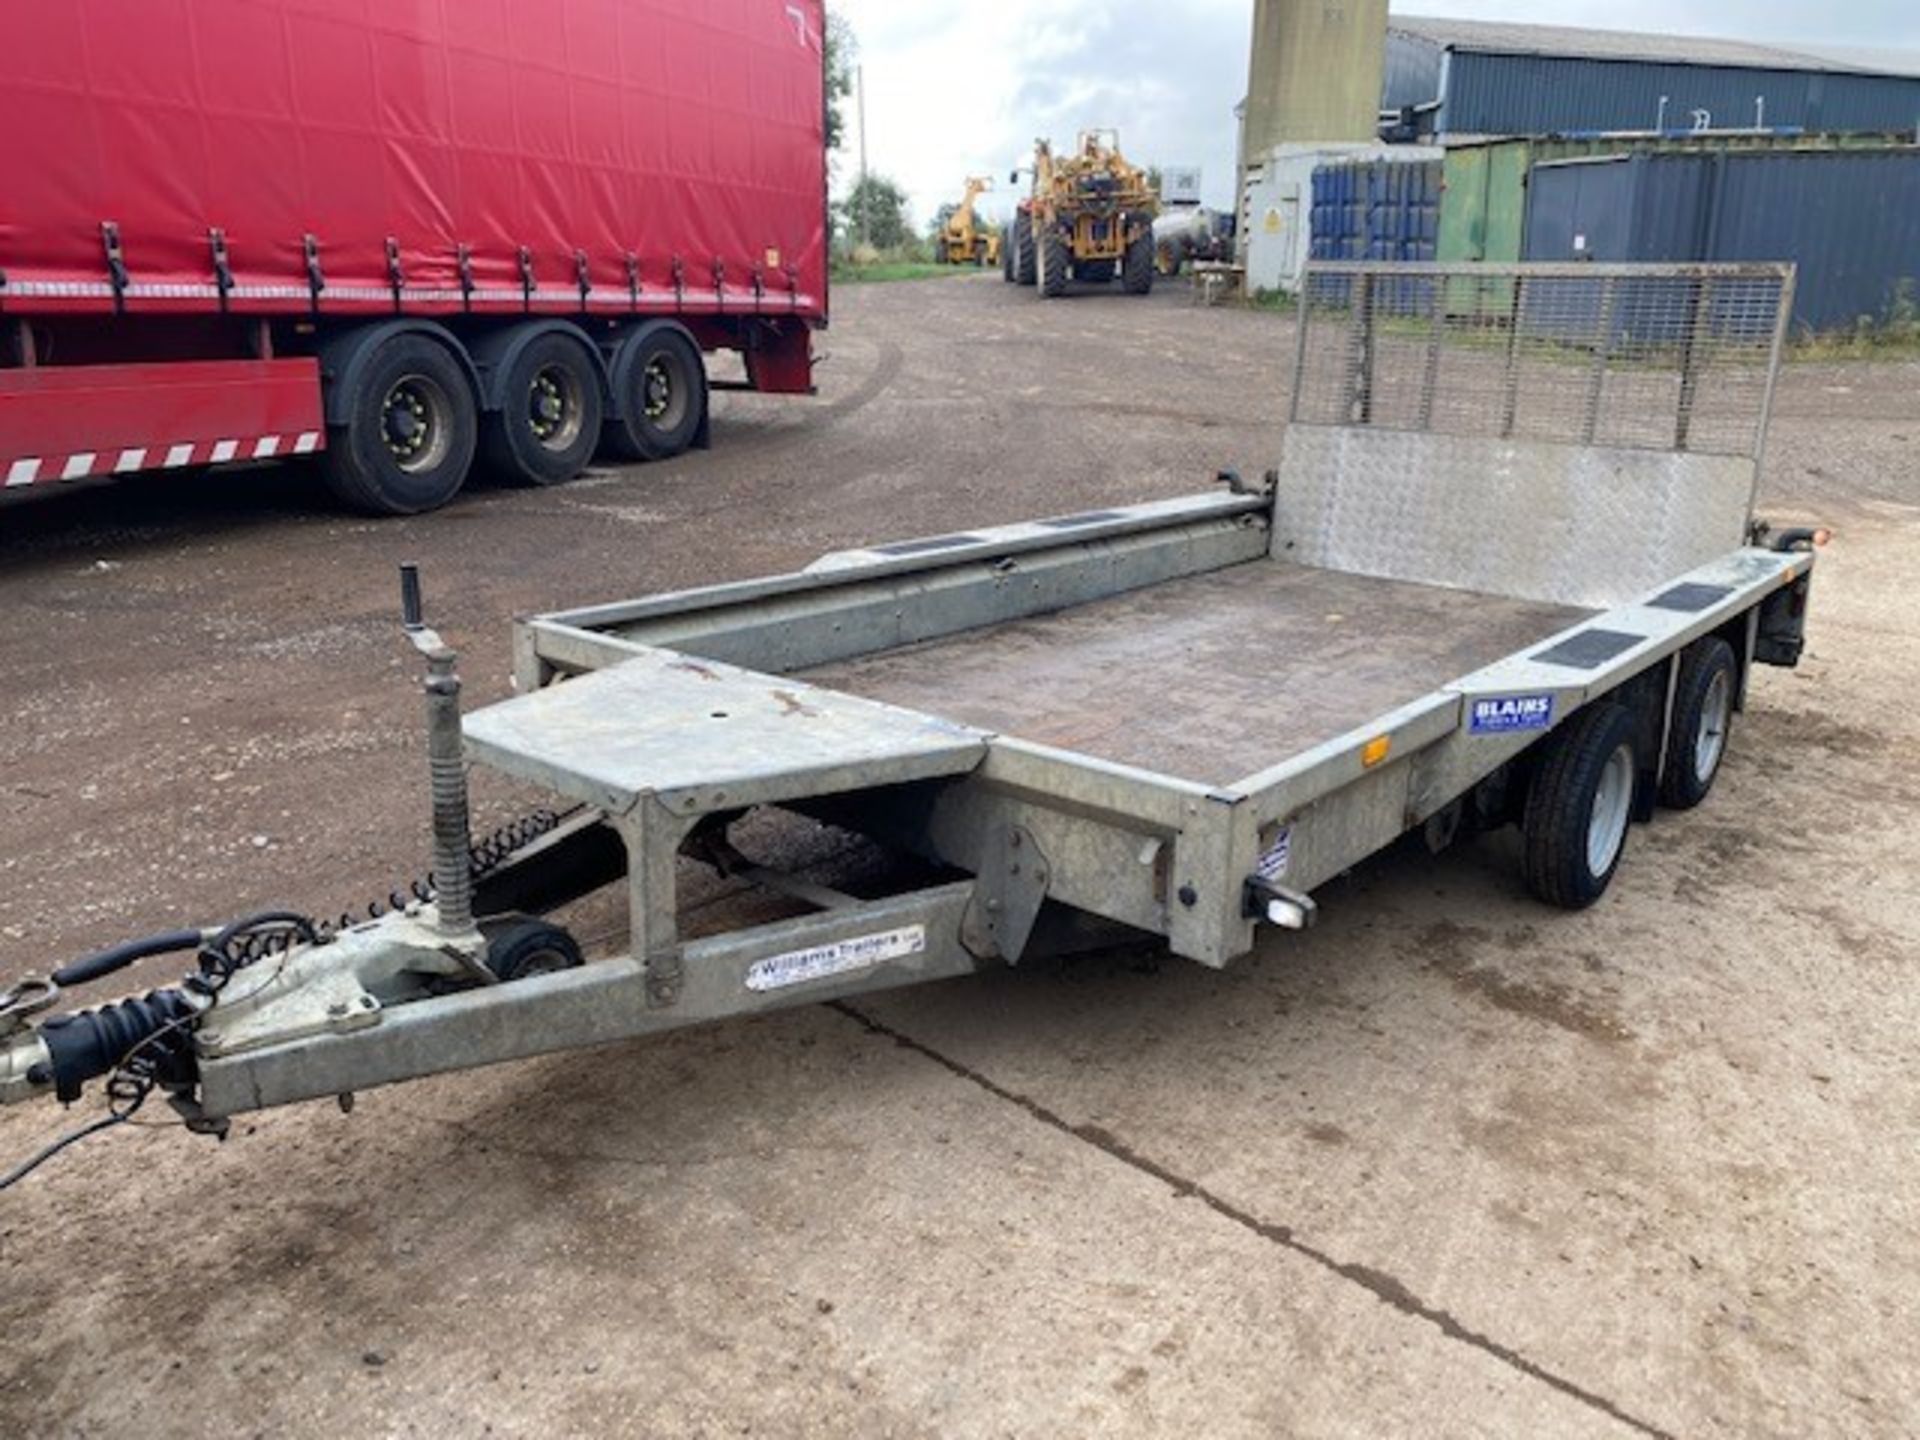 Ifor Williams 12 x 6 Plant Trailer, One Owner From New, Ball Hitch, Good Trailer All Round*PLUS VAT*